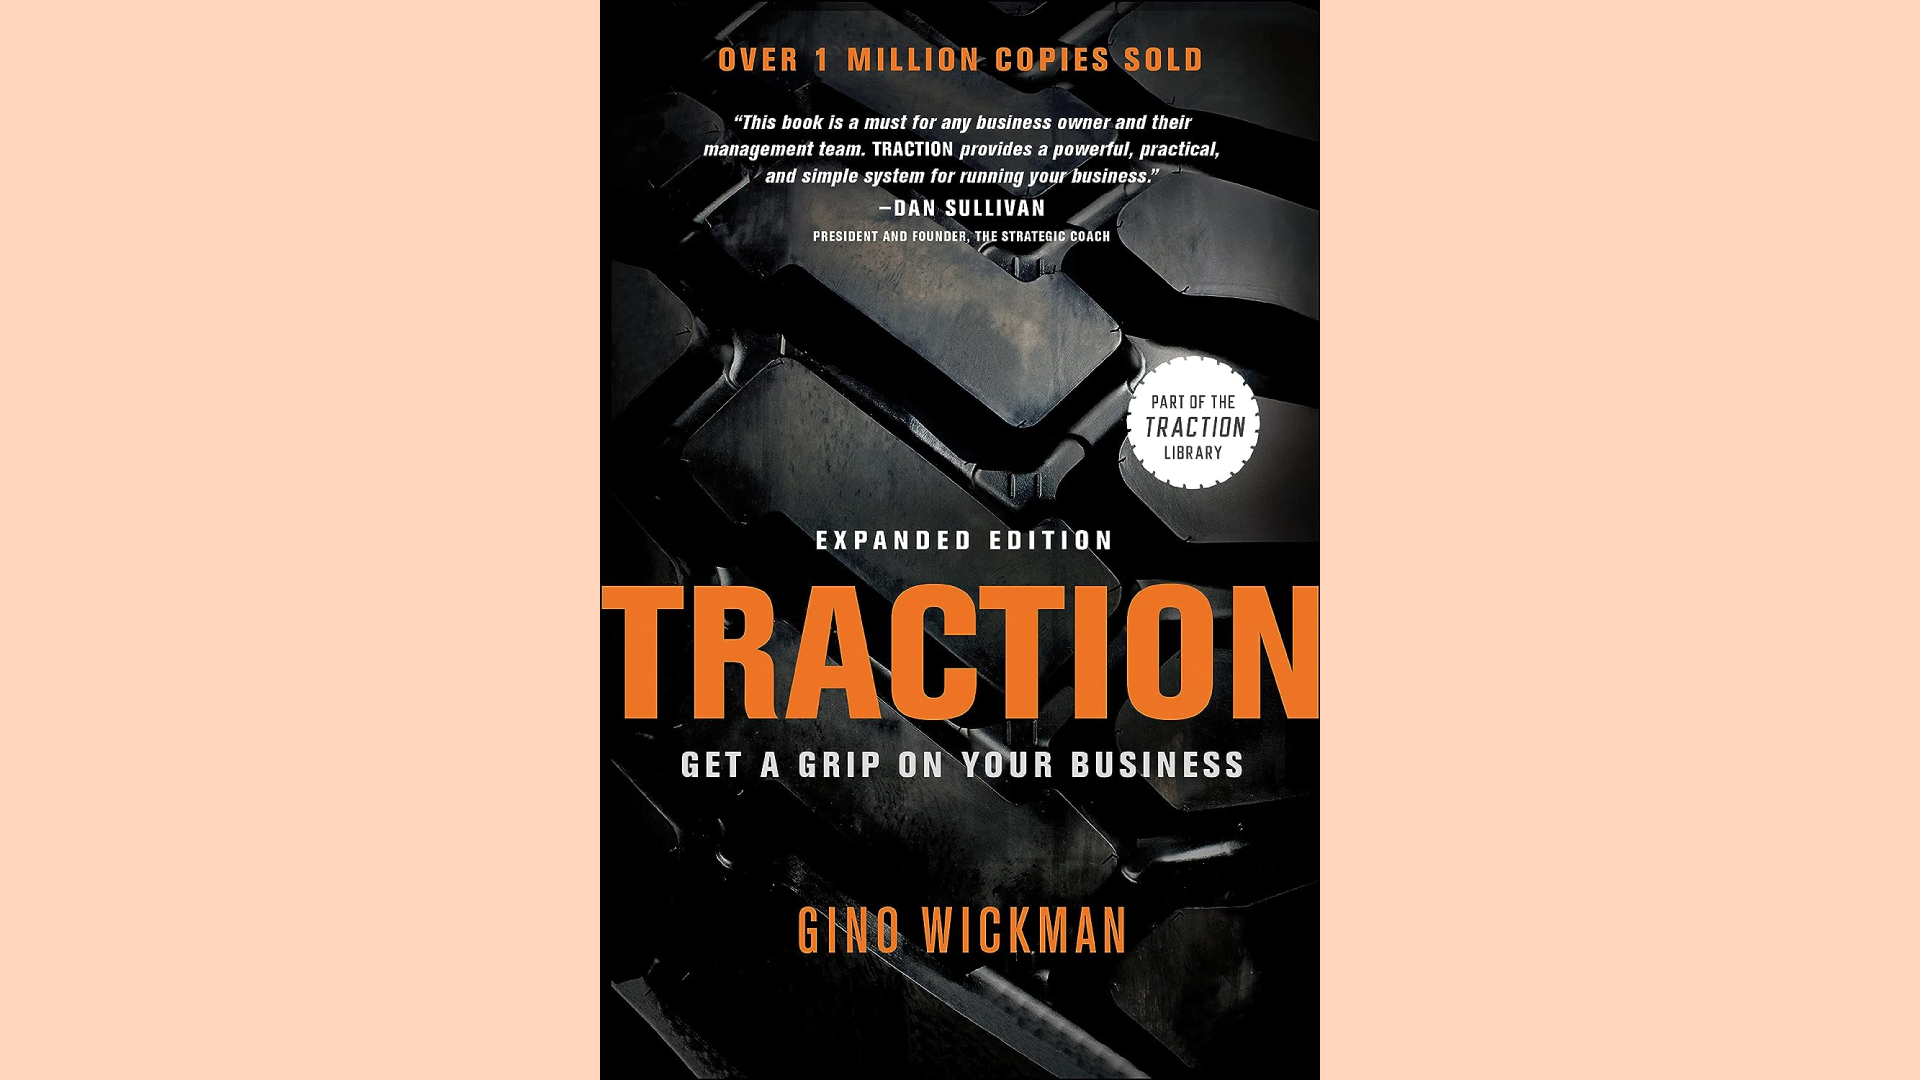 Summary: Traction by Gino Wickman